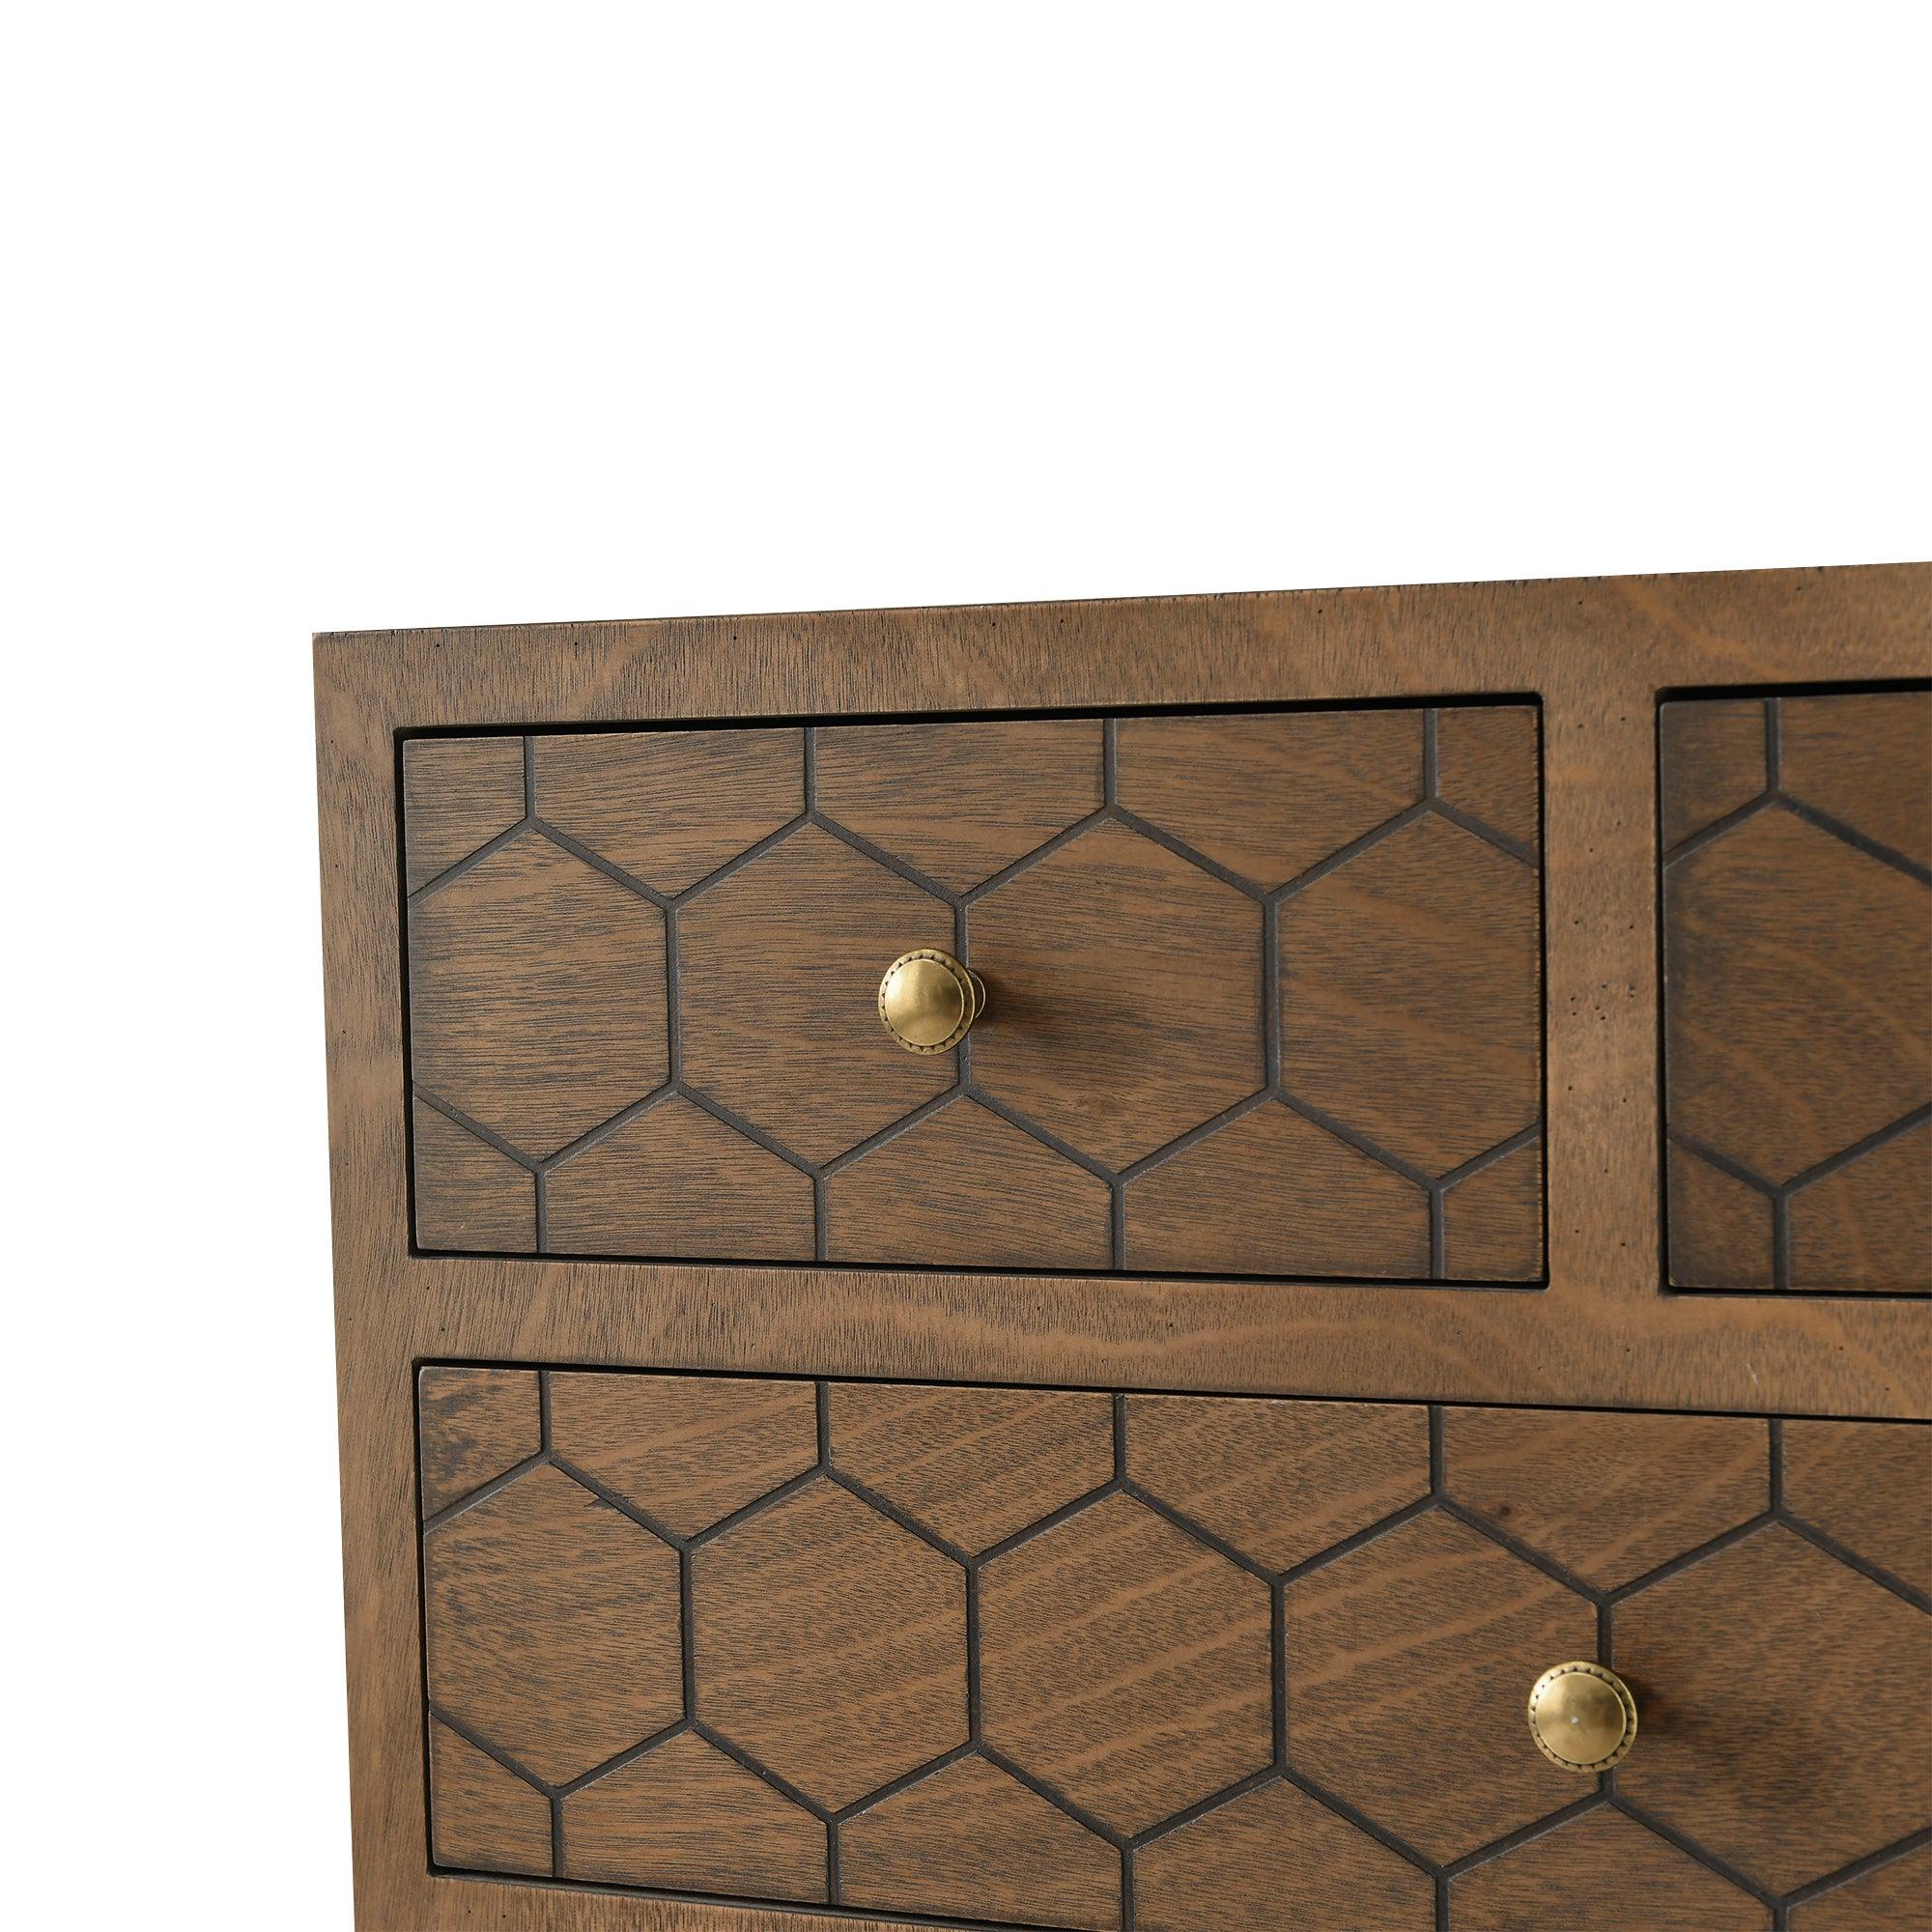 Handcrafted Accent Drawer With Abstract Carvings - 5 Drawers For Stylish Storage - Natural Wood Veneer - No Assembly Required